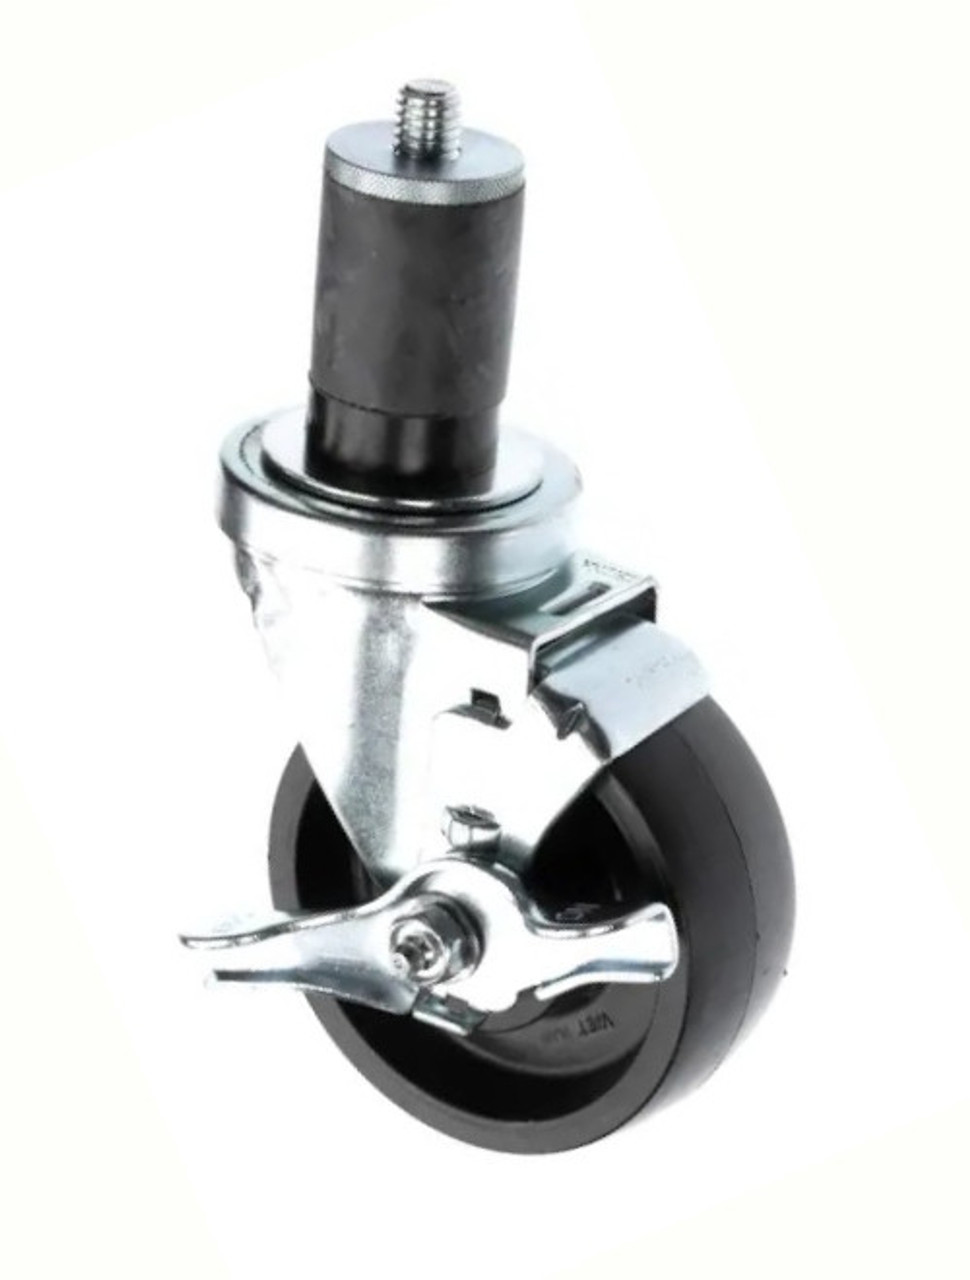 39576-AC Four inch expansion stem caster  with brake for Imperial